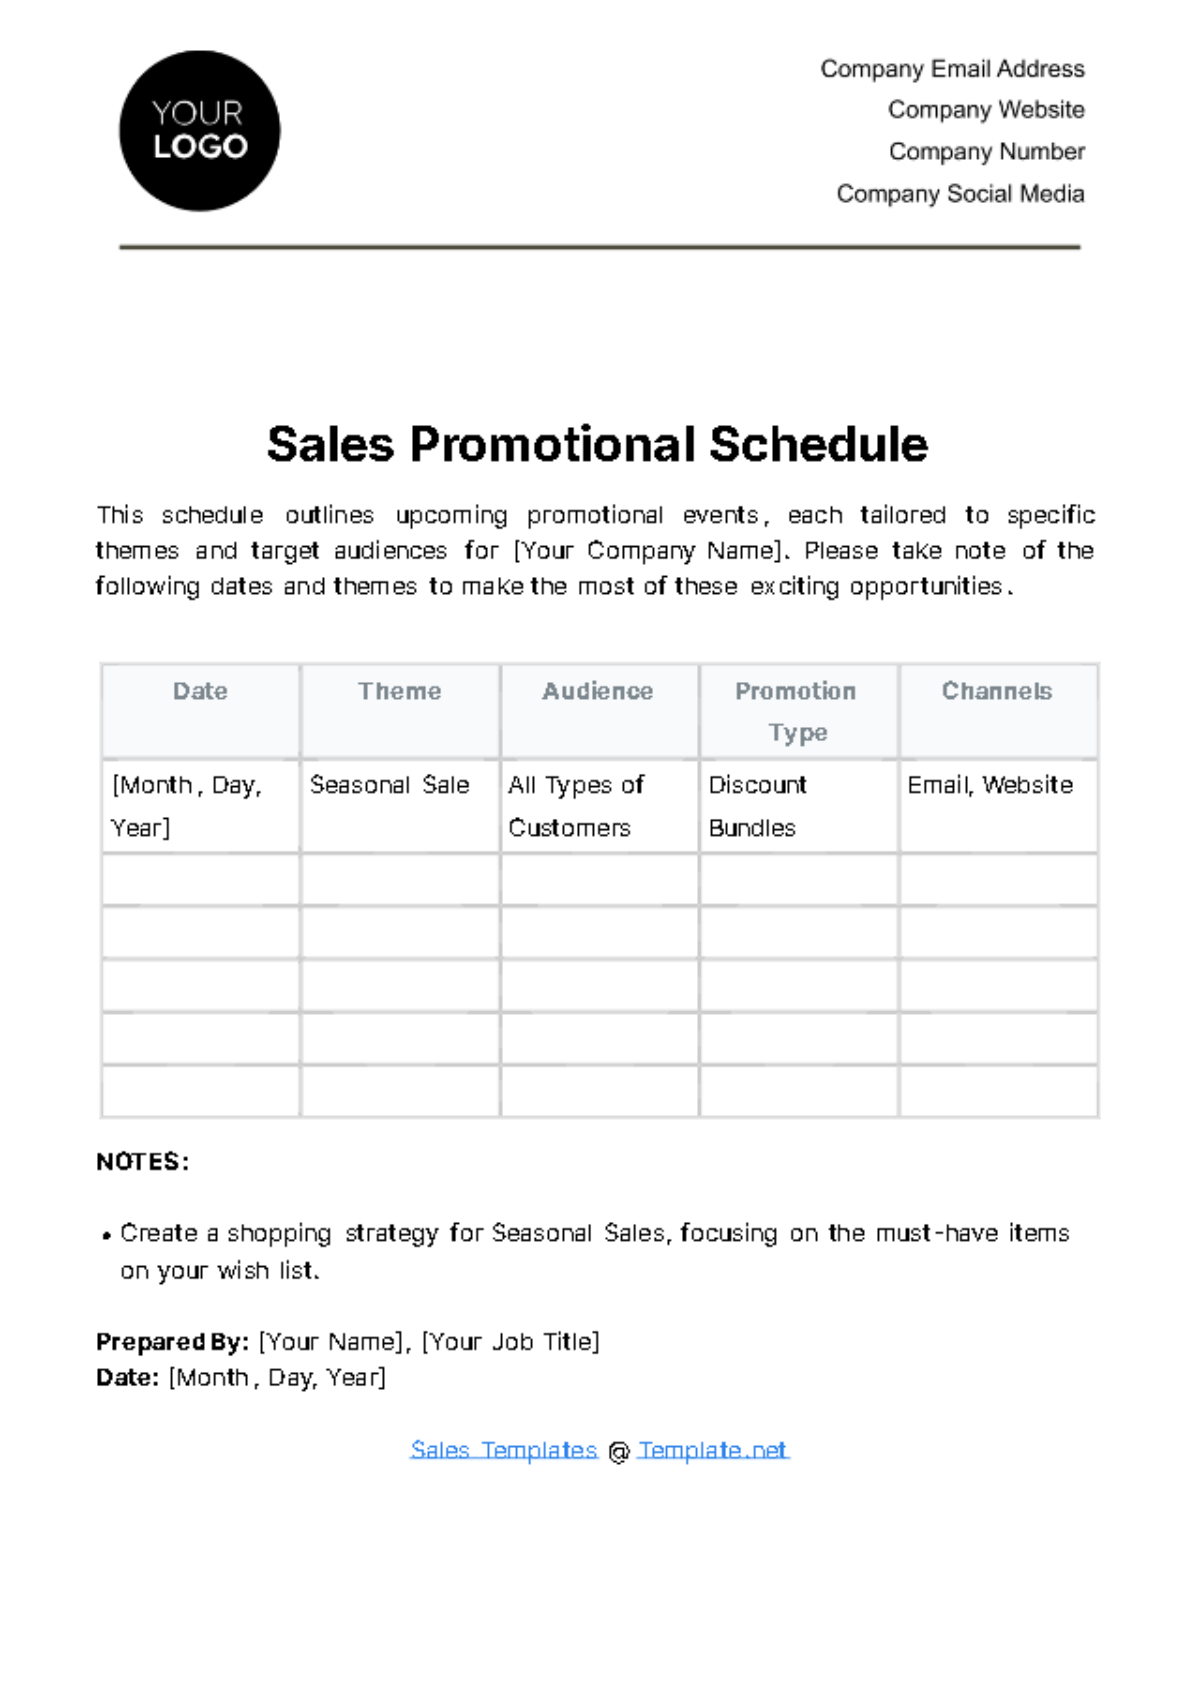 Free Sales Promotional Schedule Template